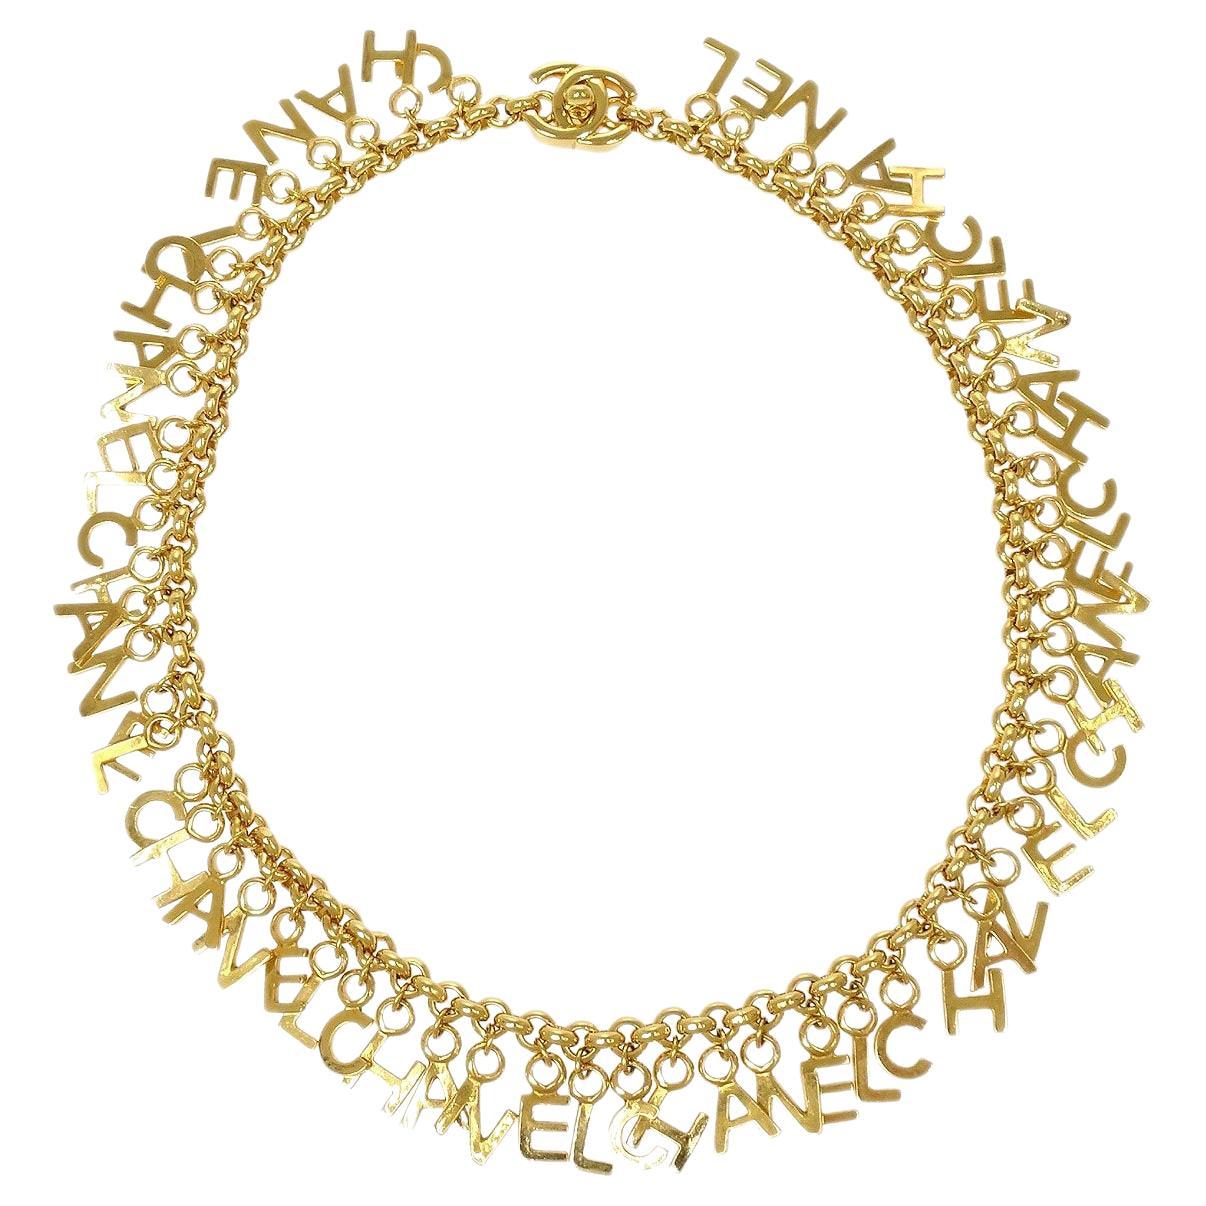 CHANEL 'CHANEL' Gold Metal Chain Logo Choker Necklace For Sale